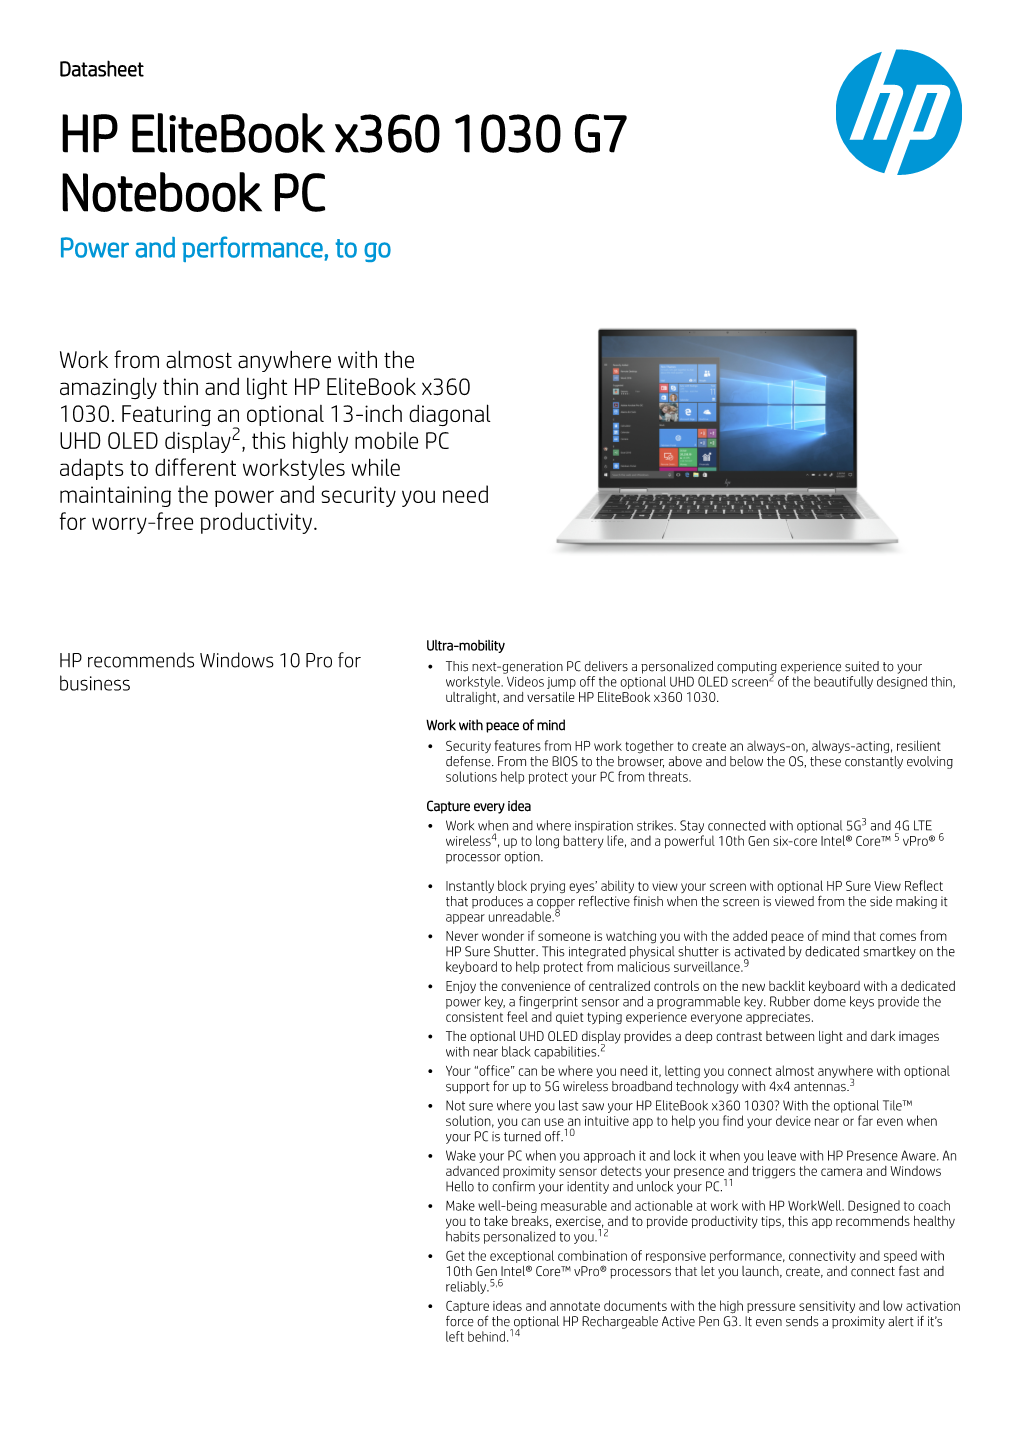 HP Elitebook X360 1030 G7 Notebook PC Power and Performance, to Go